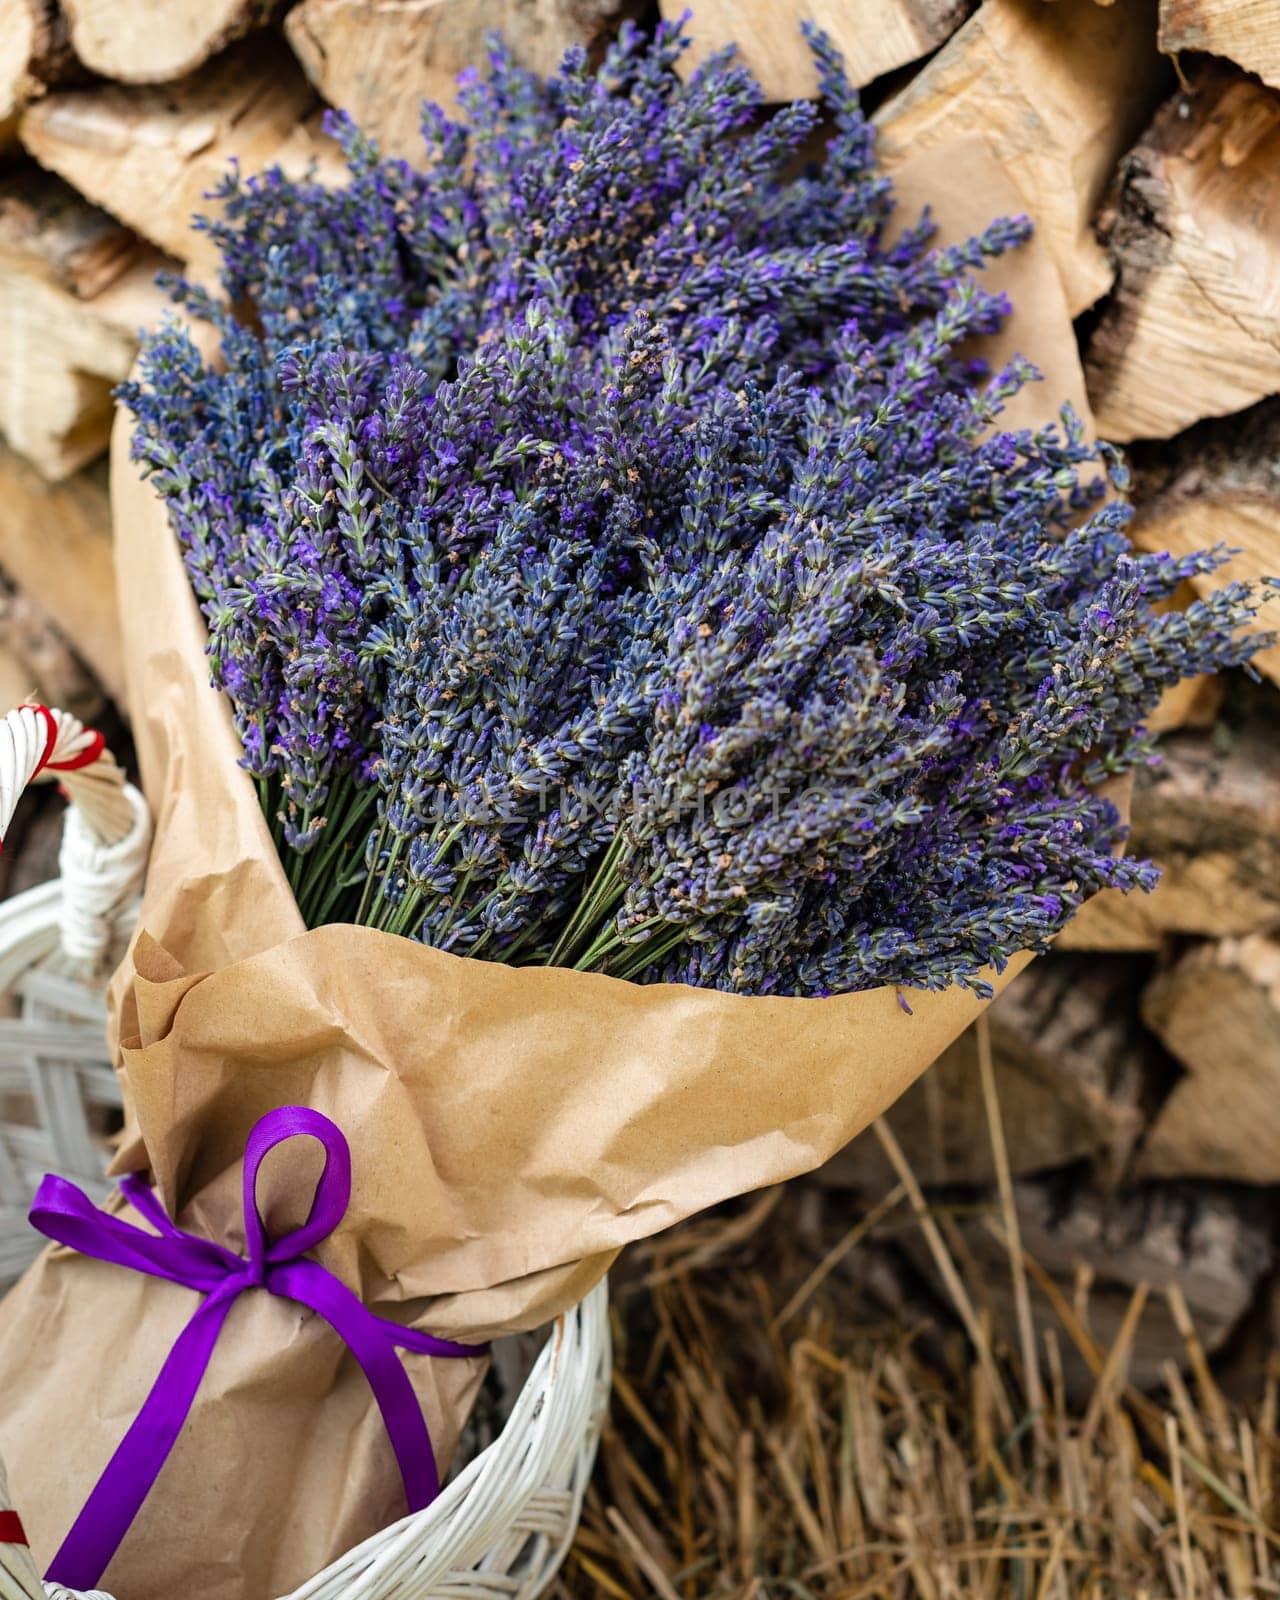 A lush and large bouquet of lavender wrapped in paper on a background of firewood by Niko_Cingaryuk